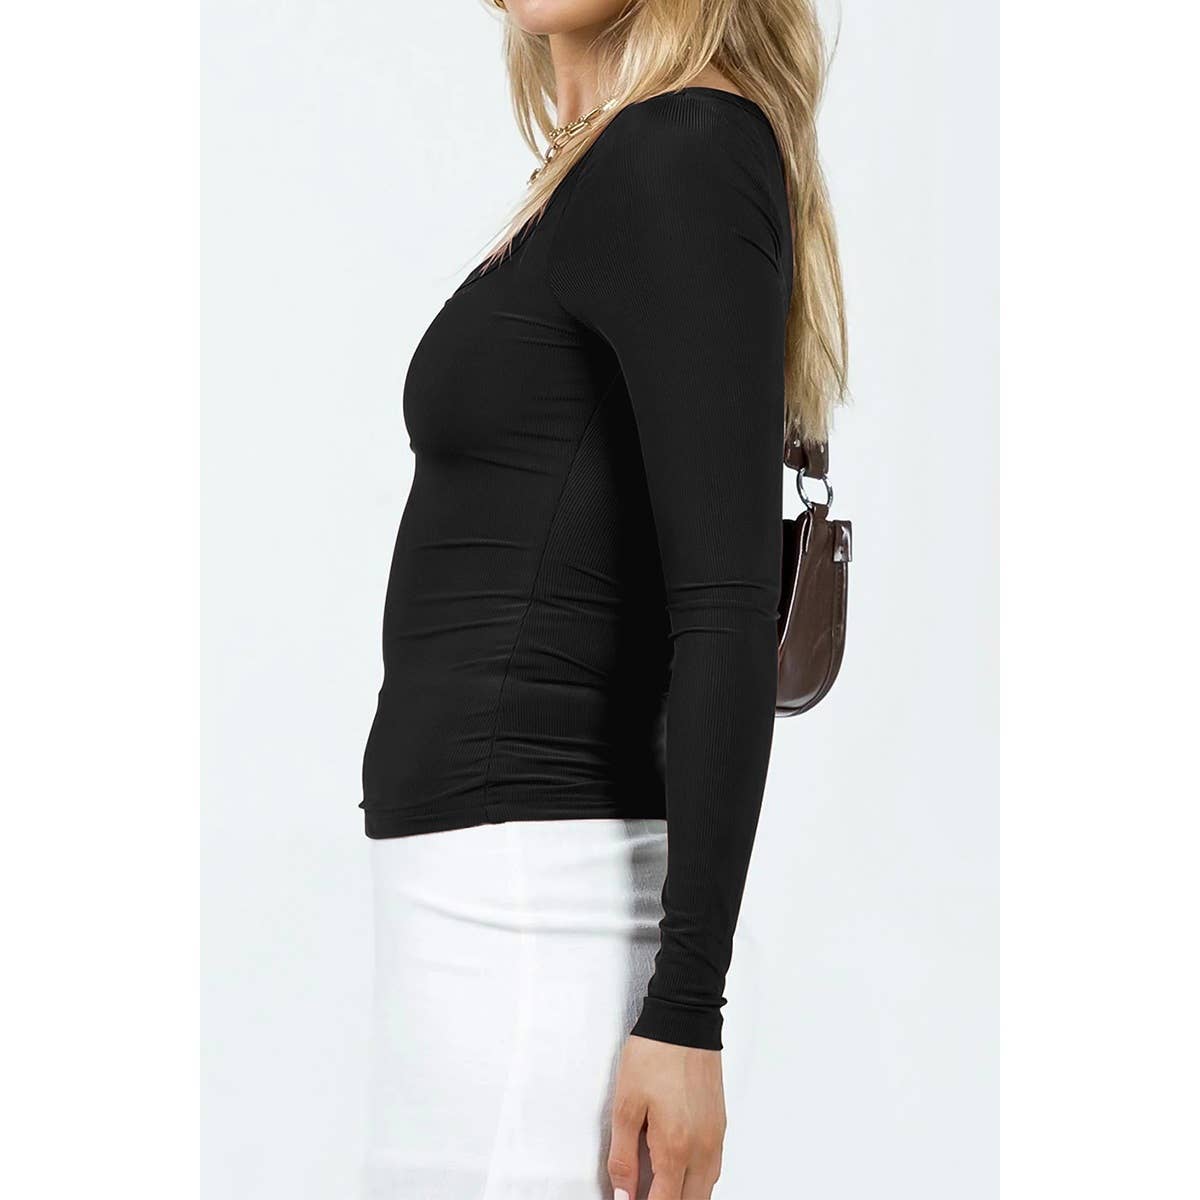 Solid Square Neck Elastic Fit Long Sleeves Top - MVTFASHION.COM